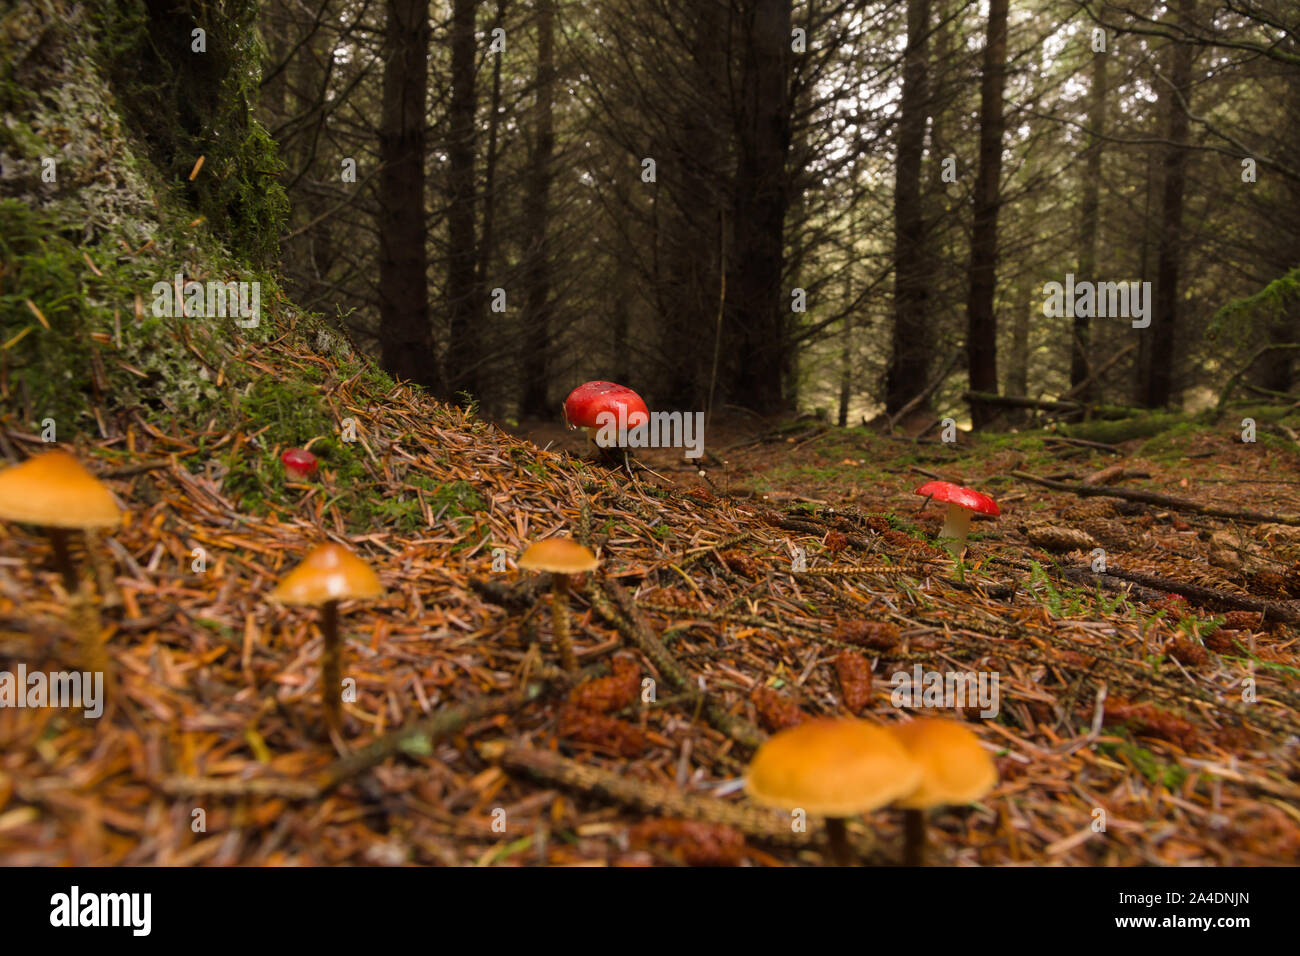 The Alwen Forest in North Wales managed by Natural Resources Wales or NRW with Russula emetica commonly known as the sickener a poisonous mushroom Stock Photo